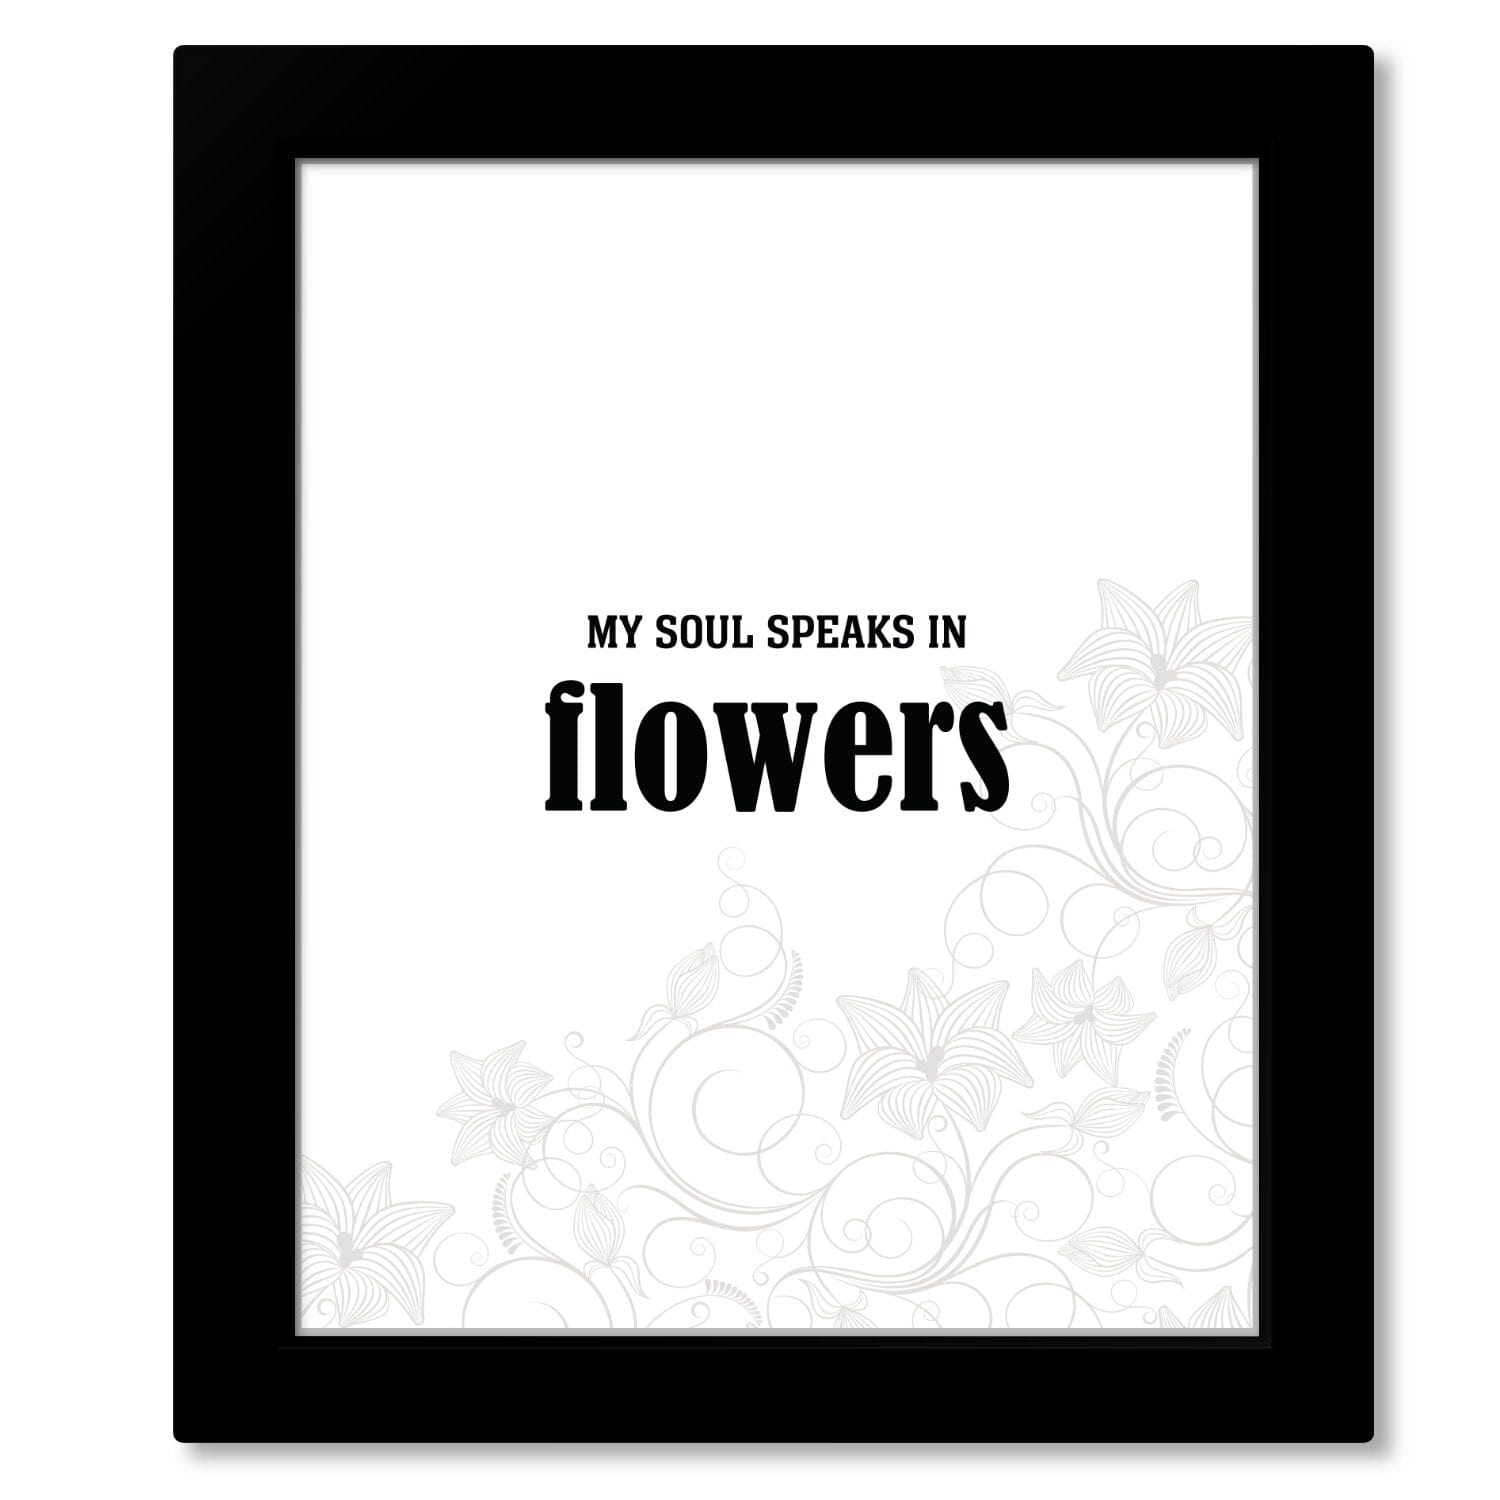 My Soul Speaks in Flowers - Wise and Witty Quote Wall Print Wise and Wiseass Quotes Song Lyrics Art 8x10 Framed Print 